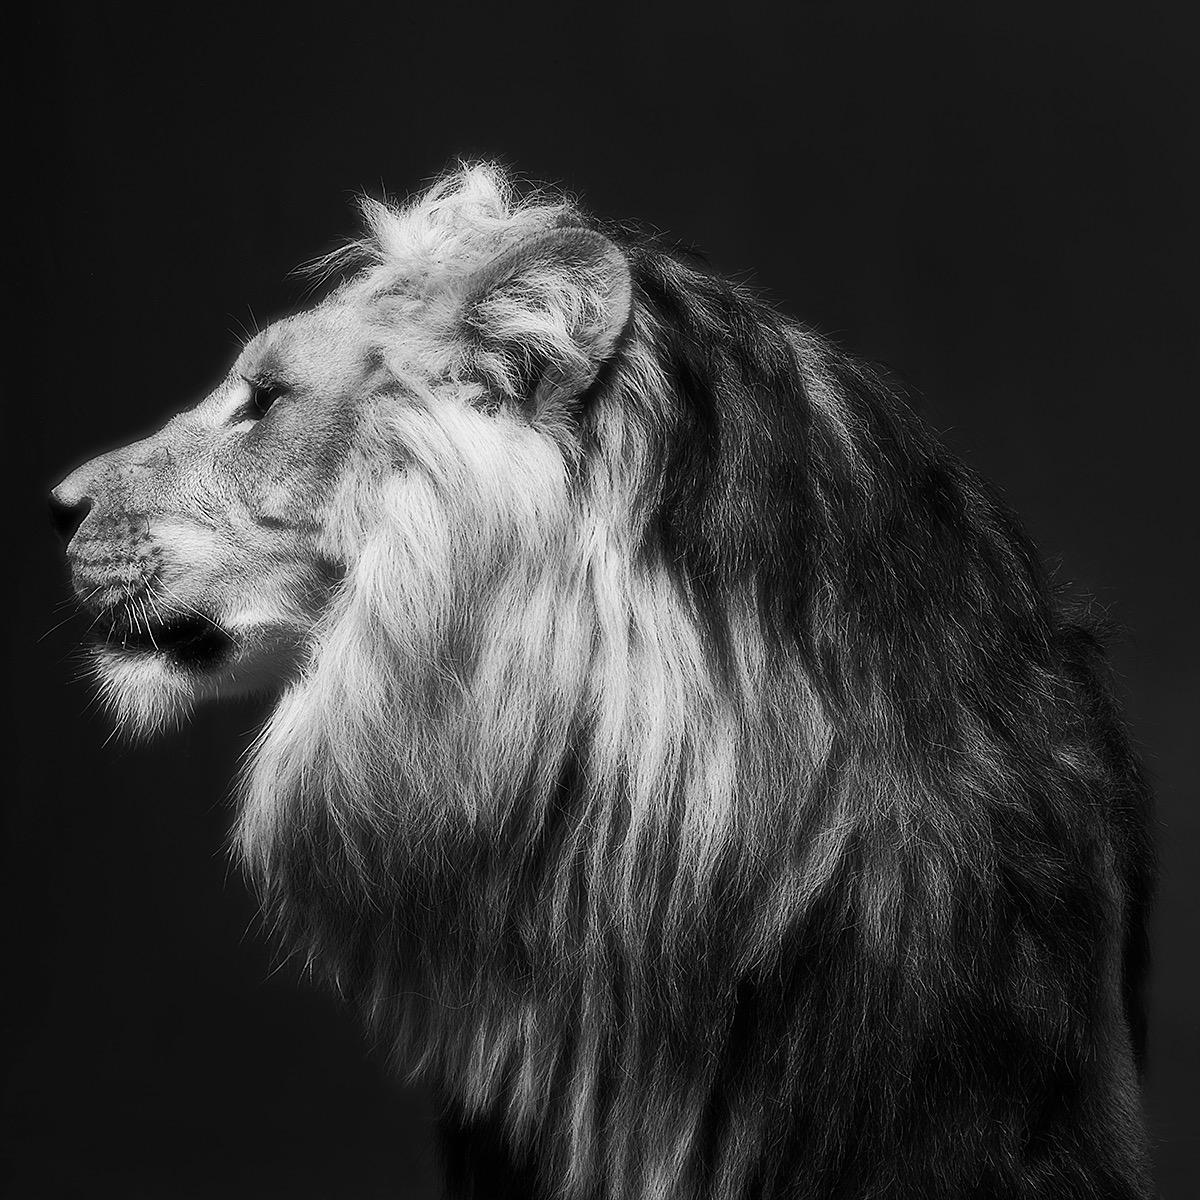 Series: Fairytale
Silver Gelatin
All available sizes & editions for each size of this photograph:
18" x 18"
30" x 30"
45" x 45"
60" x 60"
70" x 70"
Edition of 3 + 2 Artist Proofs

Moonlight Sonata. I was standing face to face with a lion, no cage,